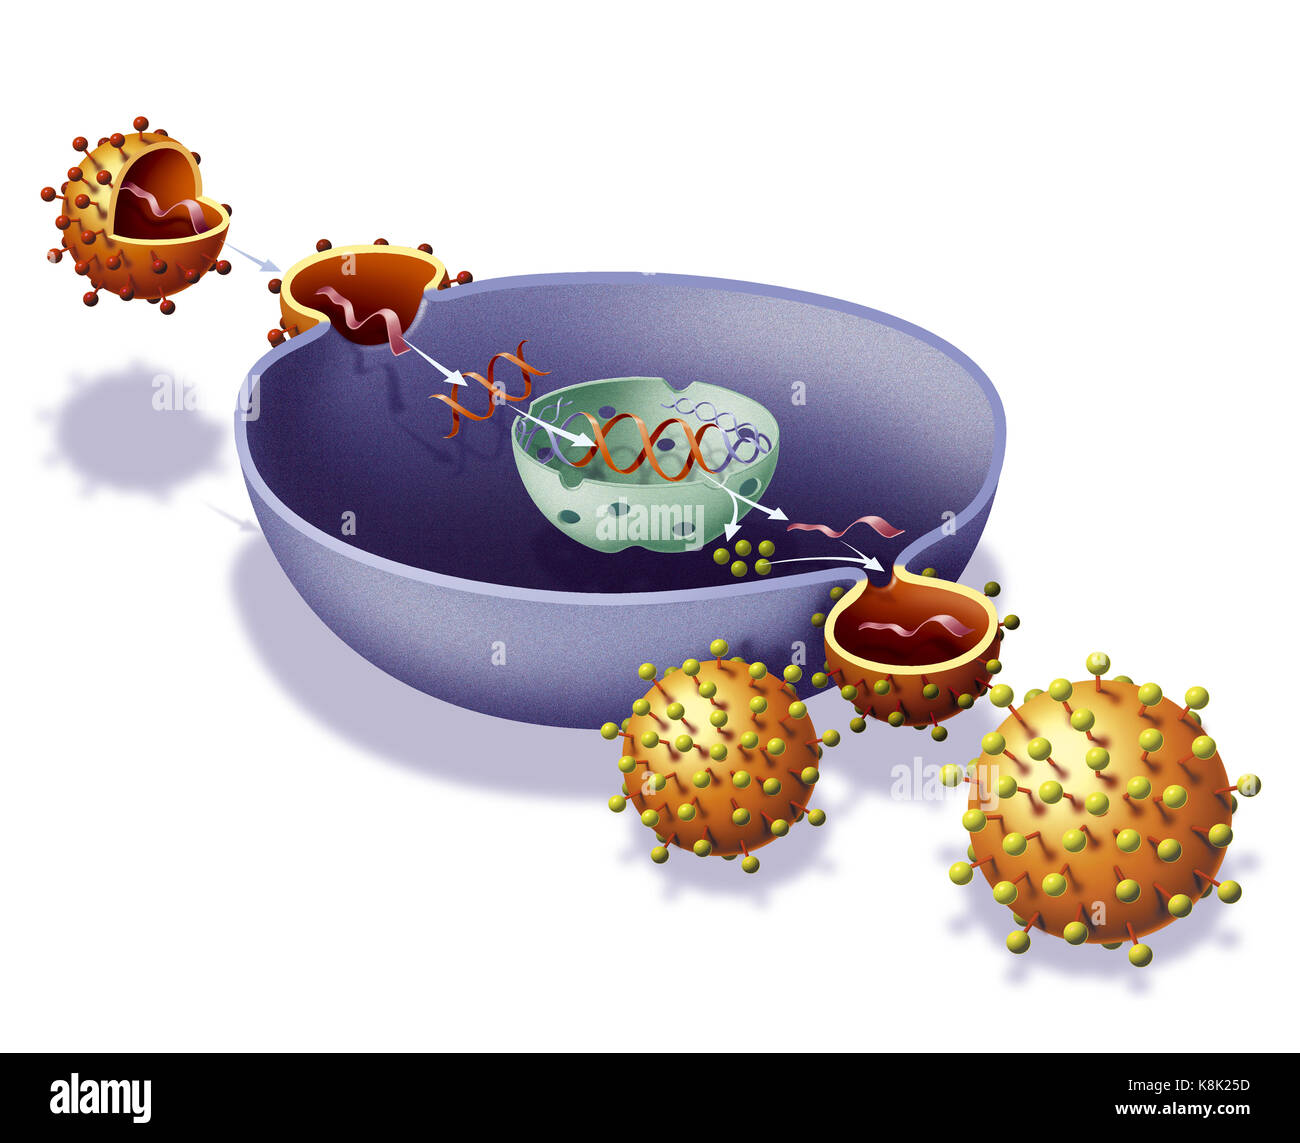 AIDS VIRUS INFECTION, DRAWING Stock Photo